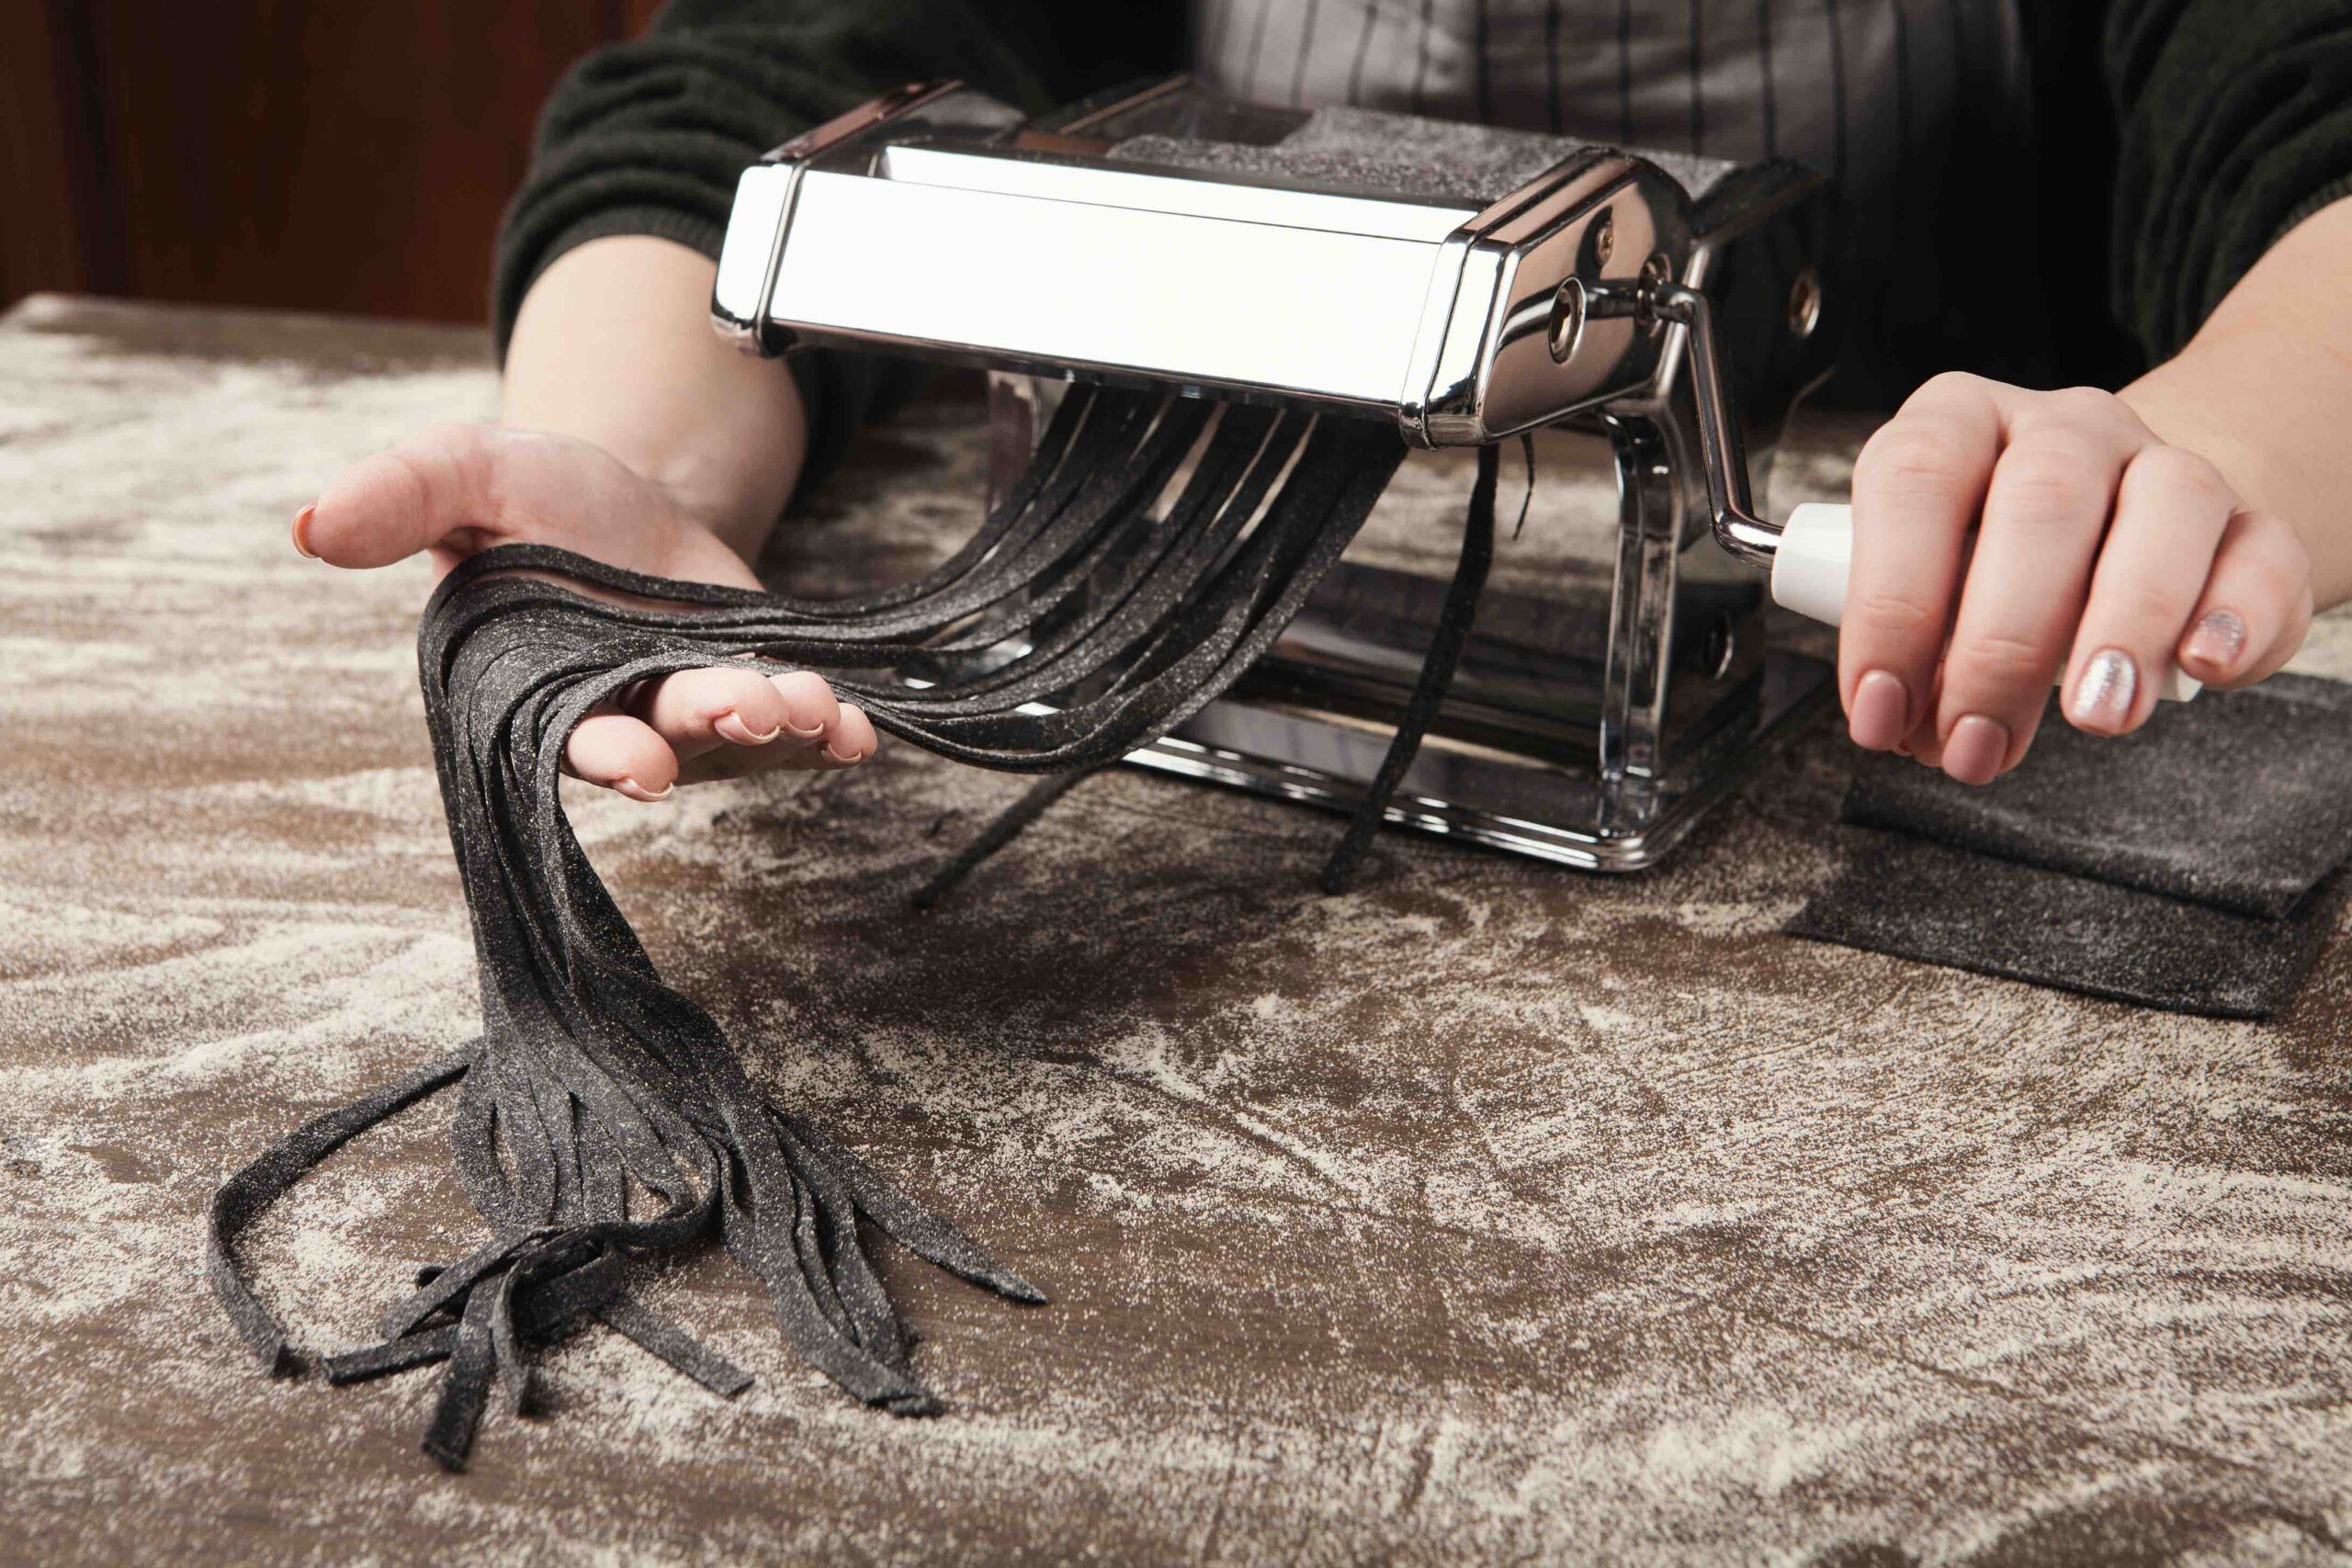 This is how to make your own black pasta (including black pasta dough recipe)